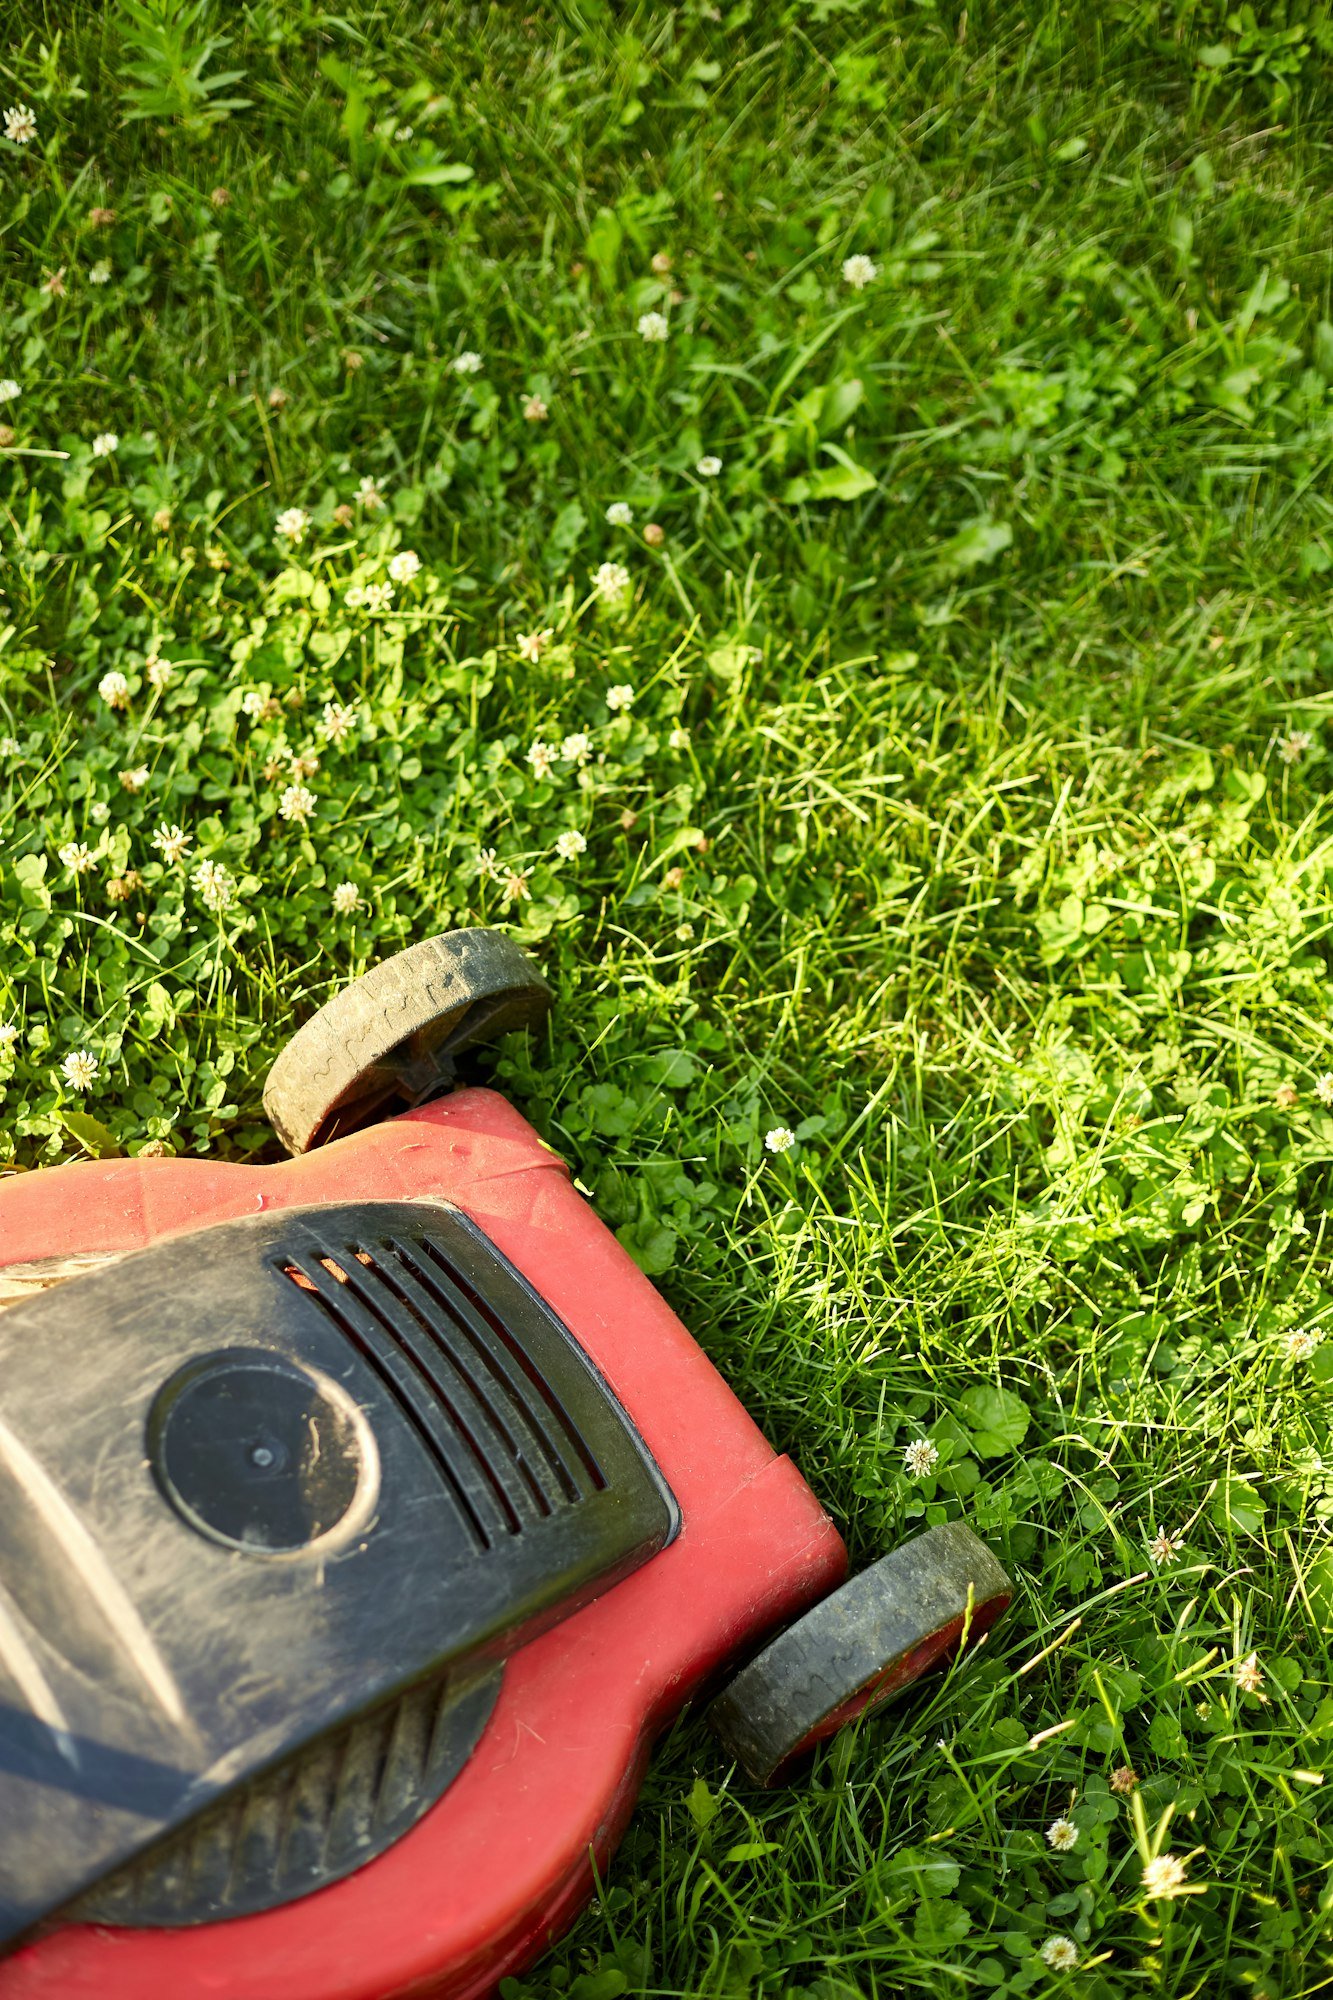 Lawnmower mows the lawn at home garden, working, sunlight